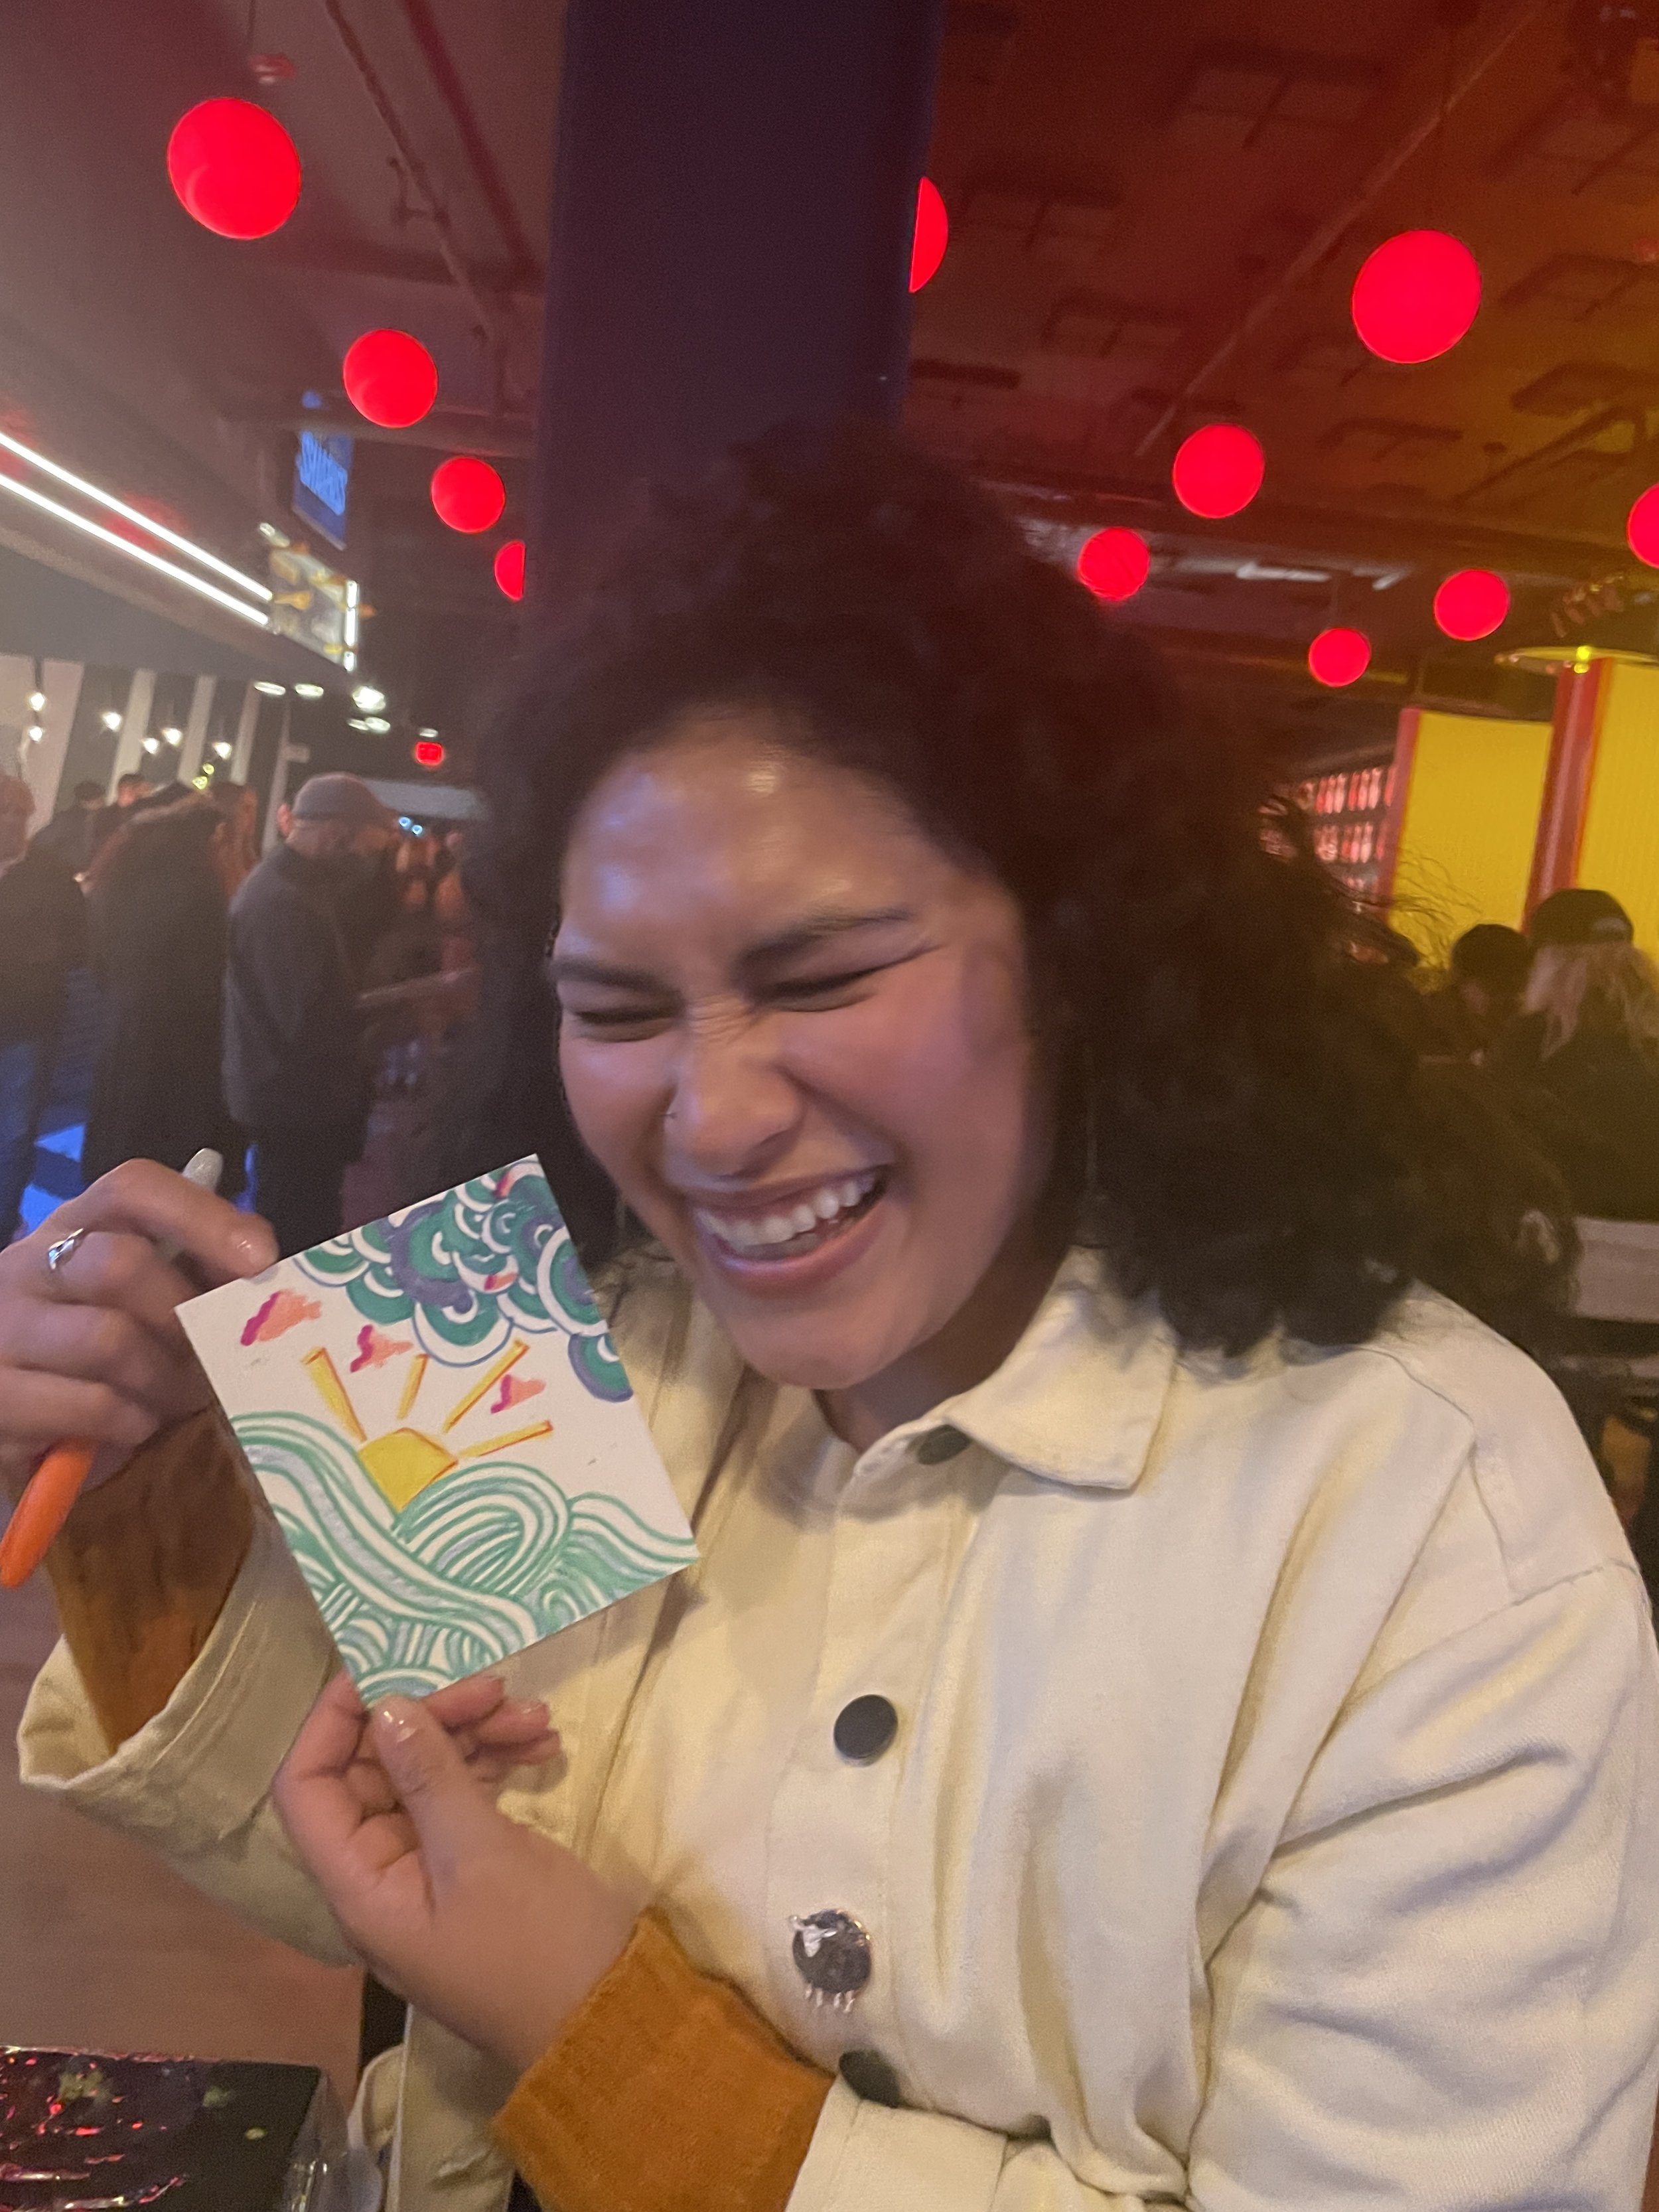 A woman smiling deeply, holding up a postcard she drew with a swirling design